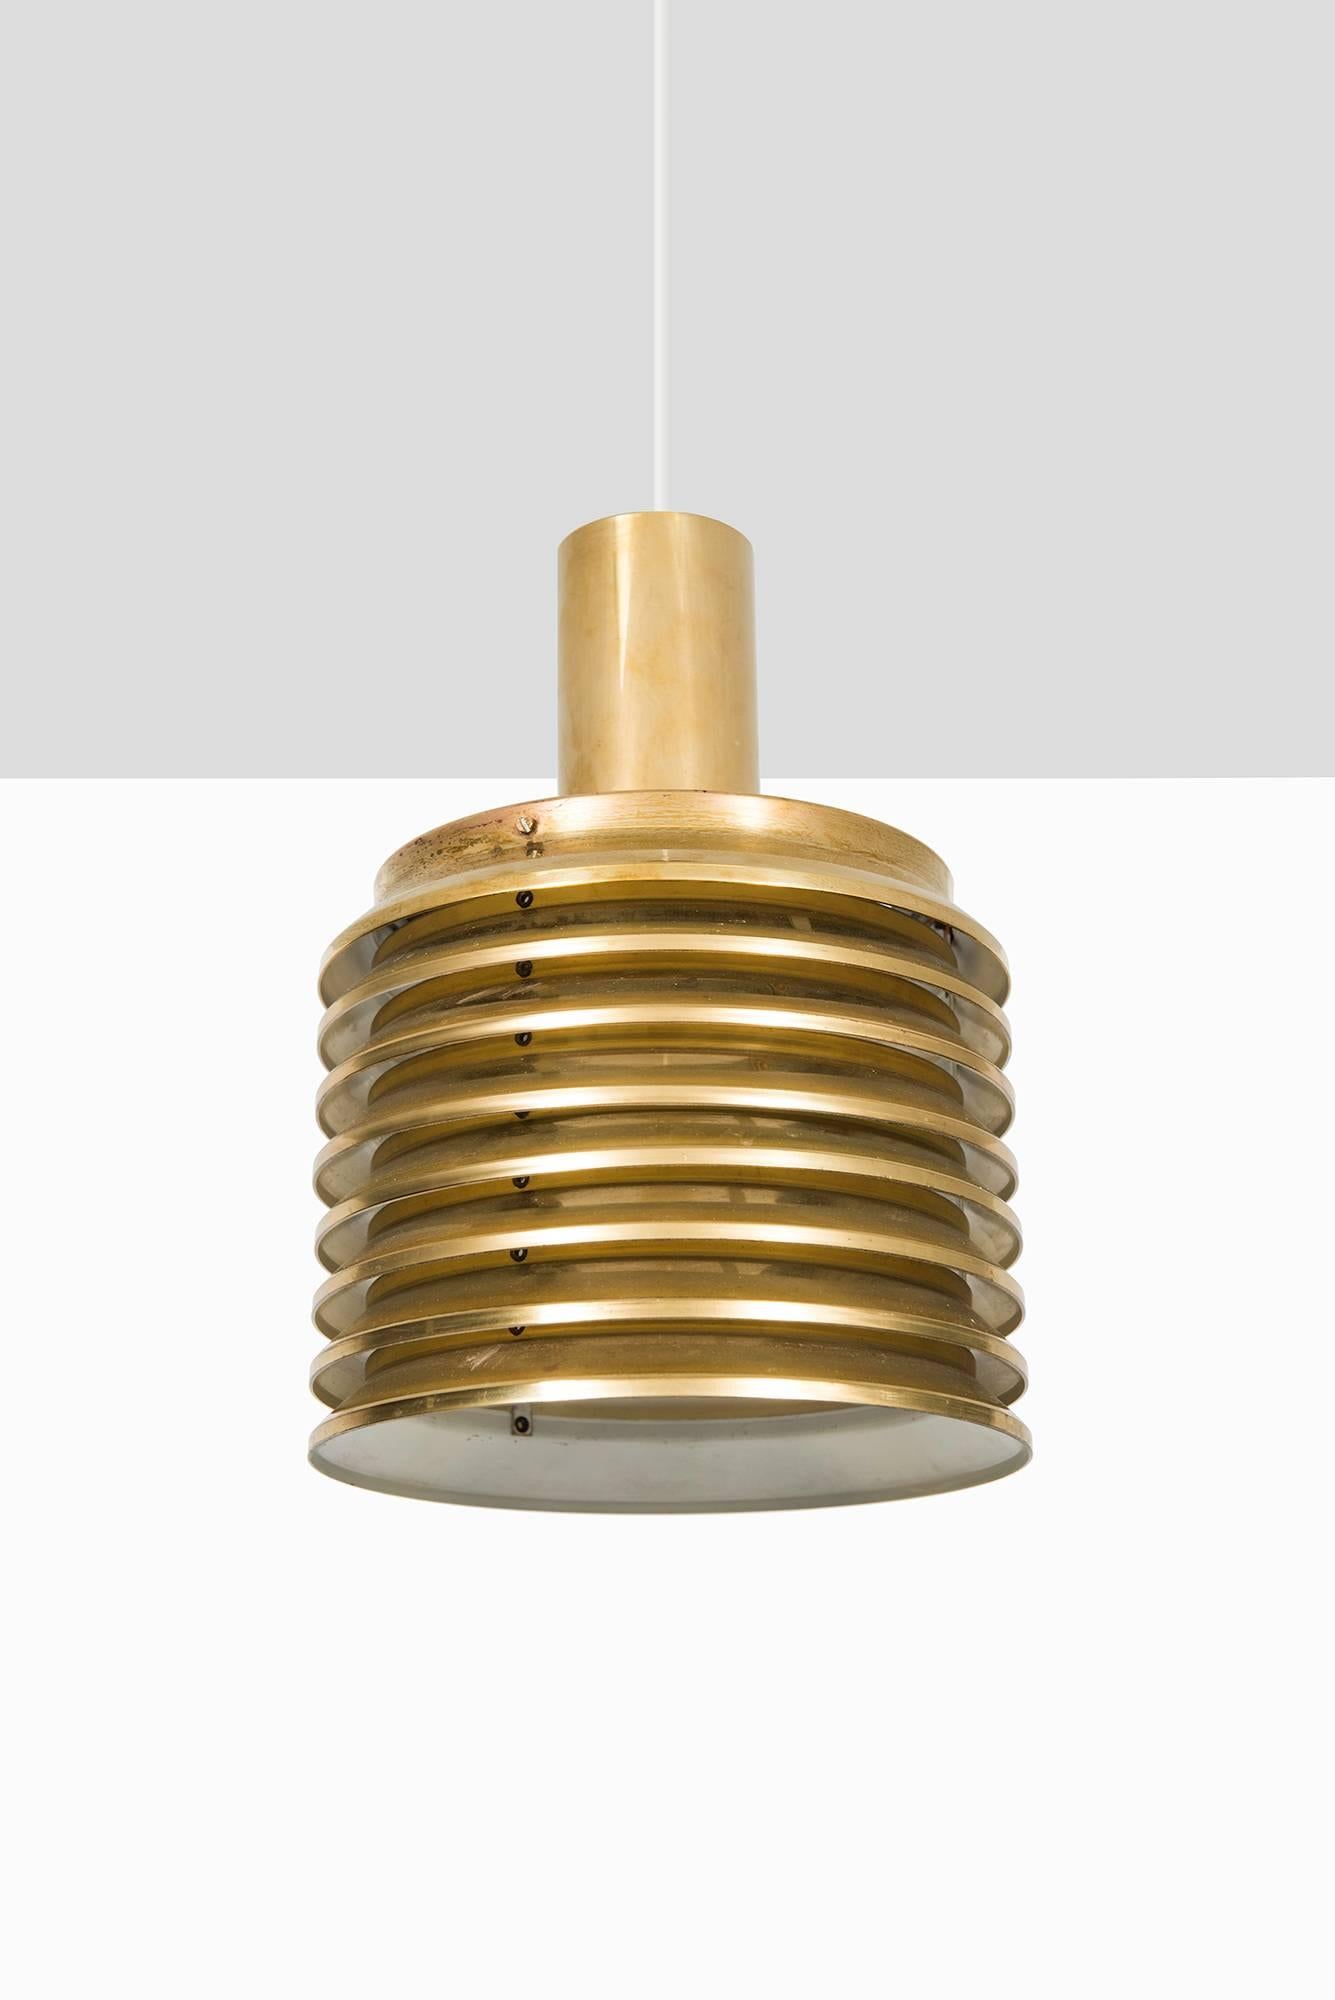 A set of five ceiling lamps model T-642 designed by Hans-Agne Jakobsson. Produced by Hans-Agne Jakobsson in Markaryd, Sweden.